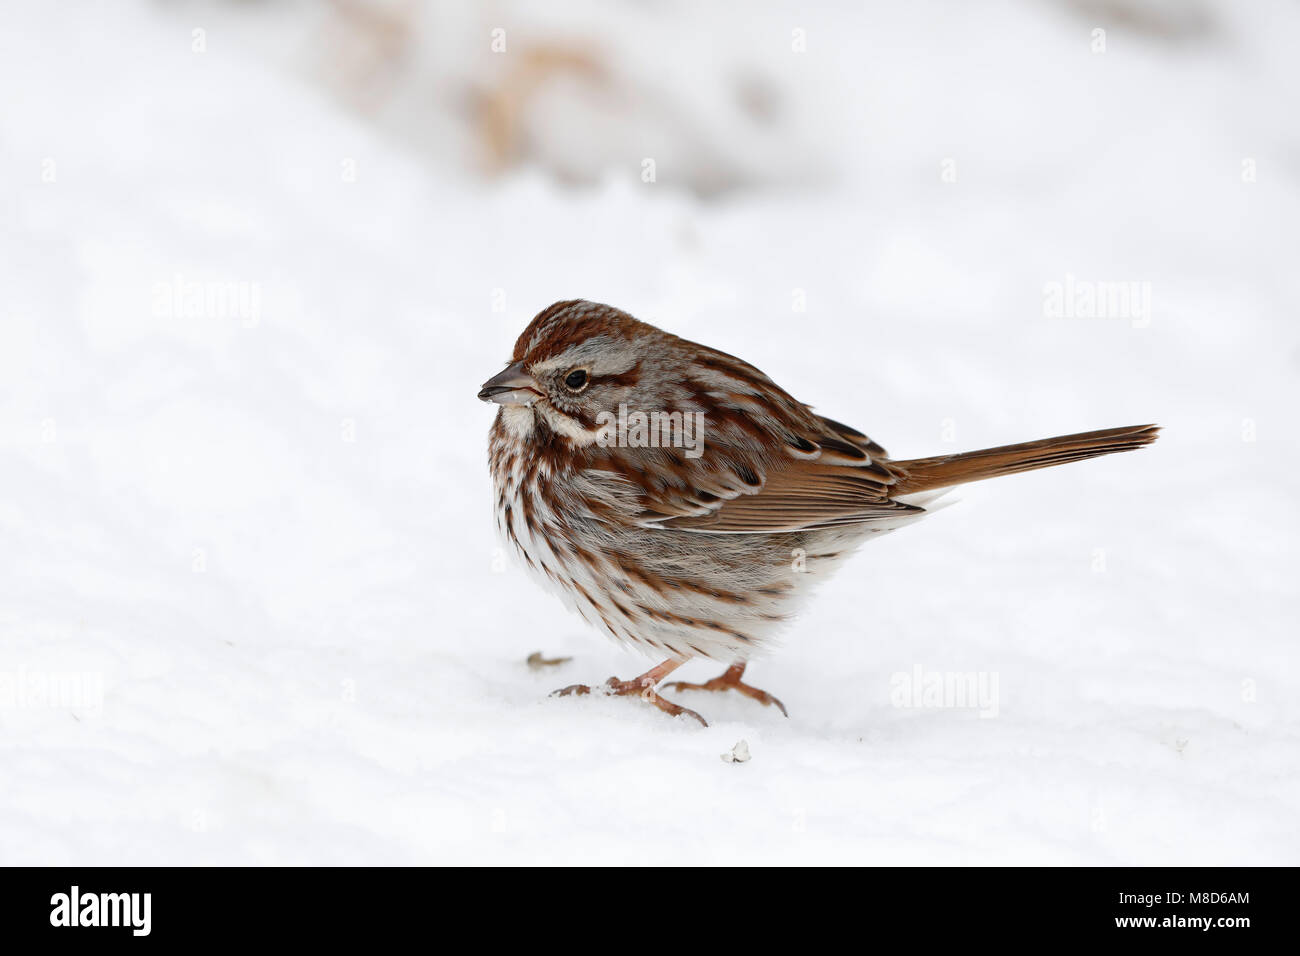 Zanggors zittend in de sneeuw; Song Sparrow (Melospiza melodia) standing on snow Stock Photo